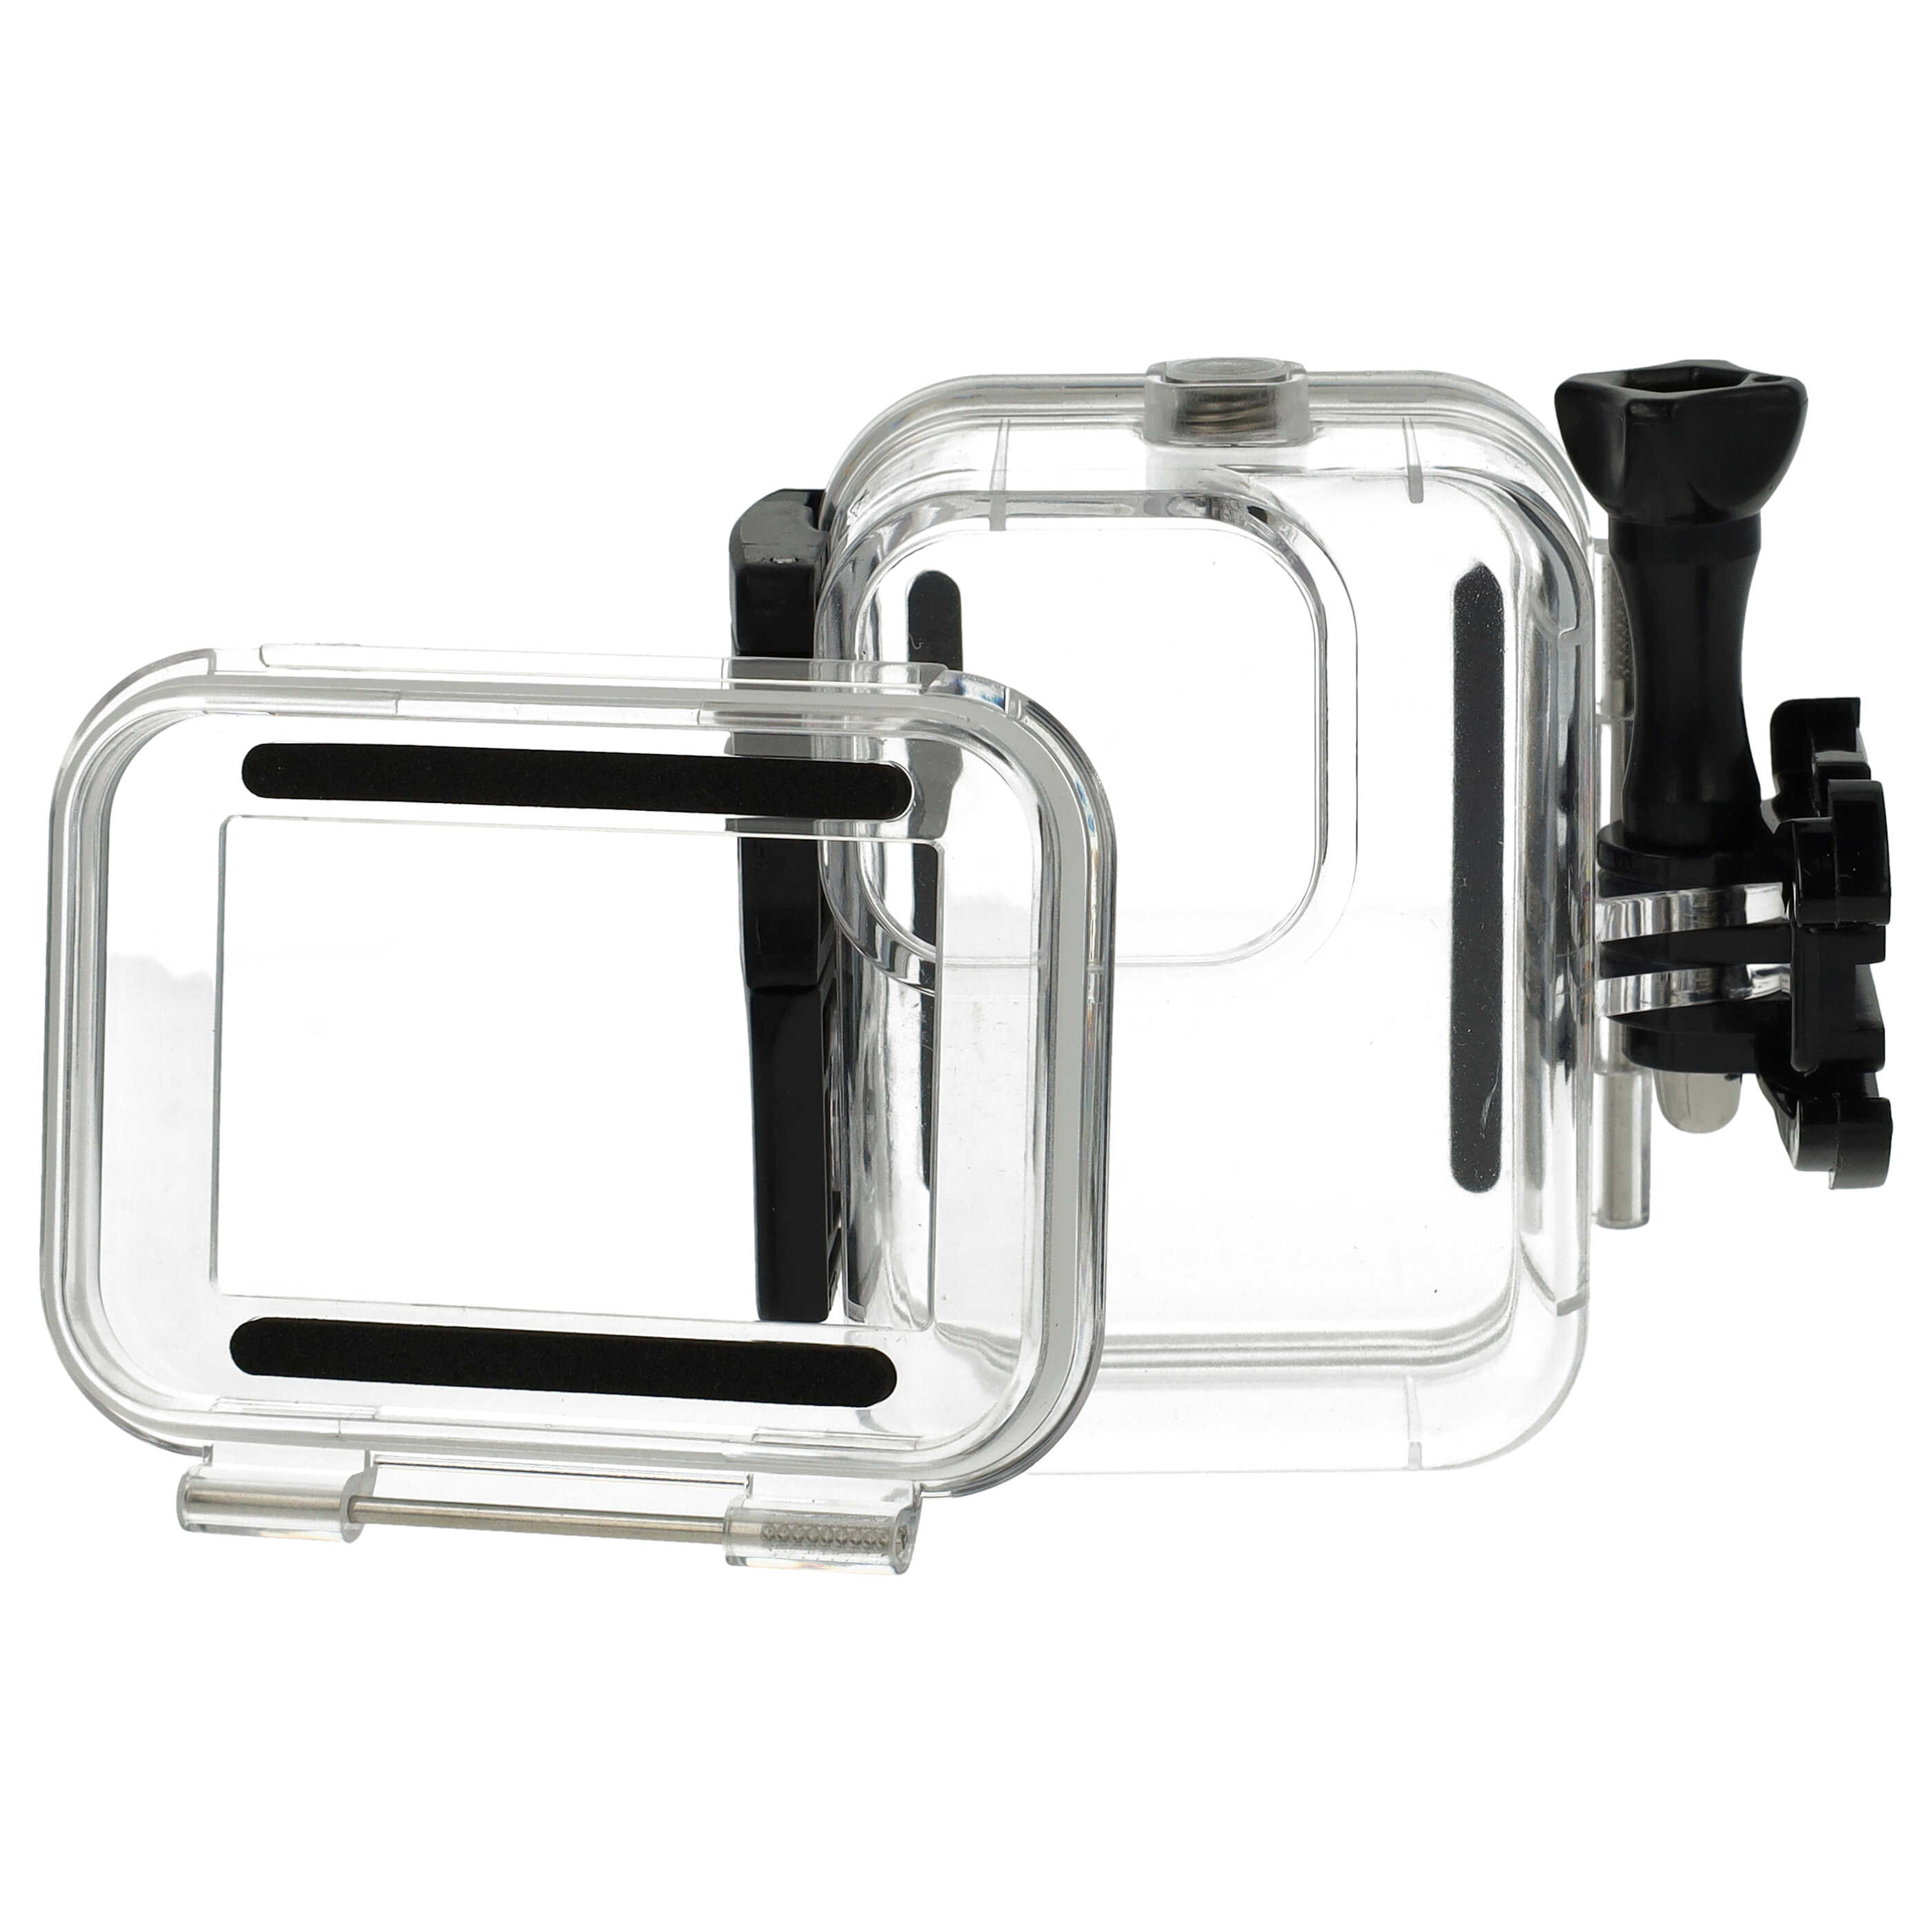 Underwater Housing suitable for GoPro Hero 10, 11, 9 Action Camera - Up to a max. Depth of 60 m